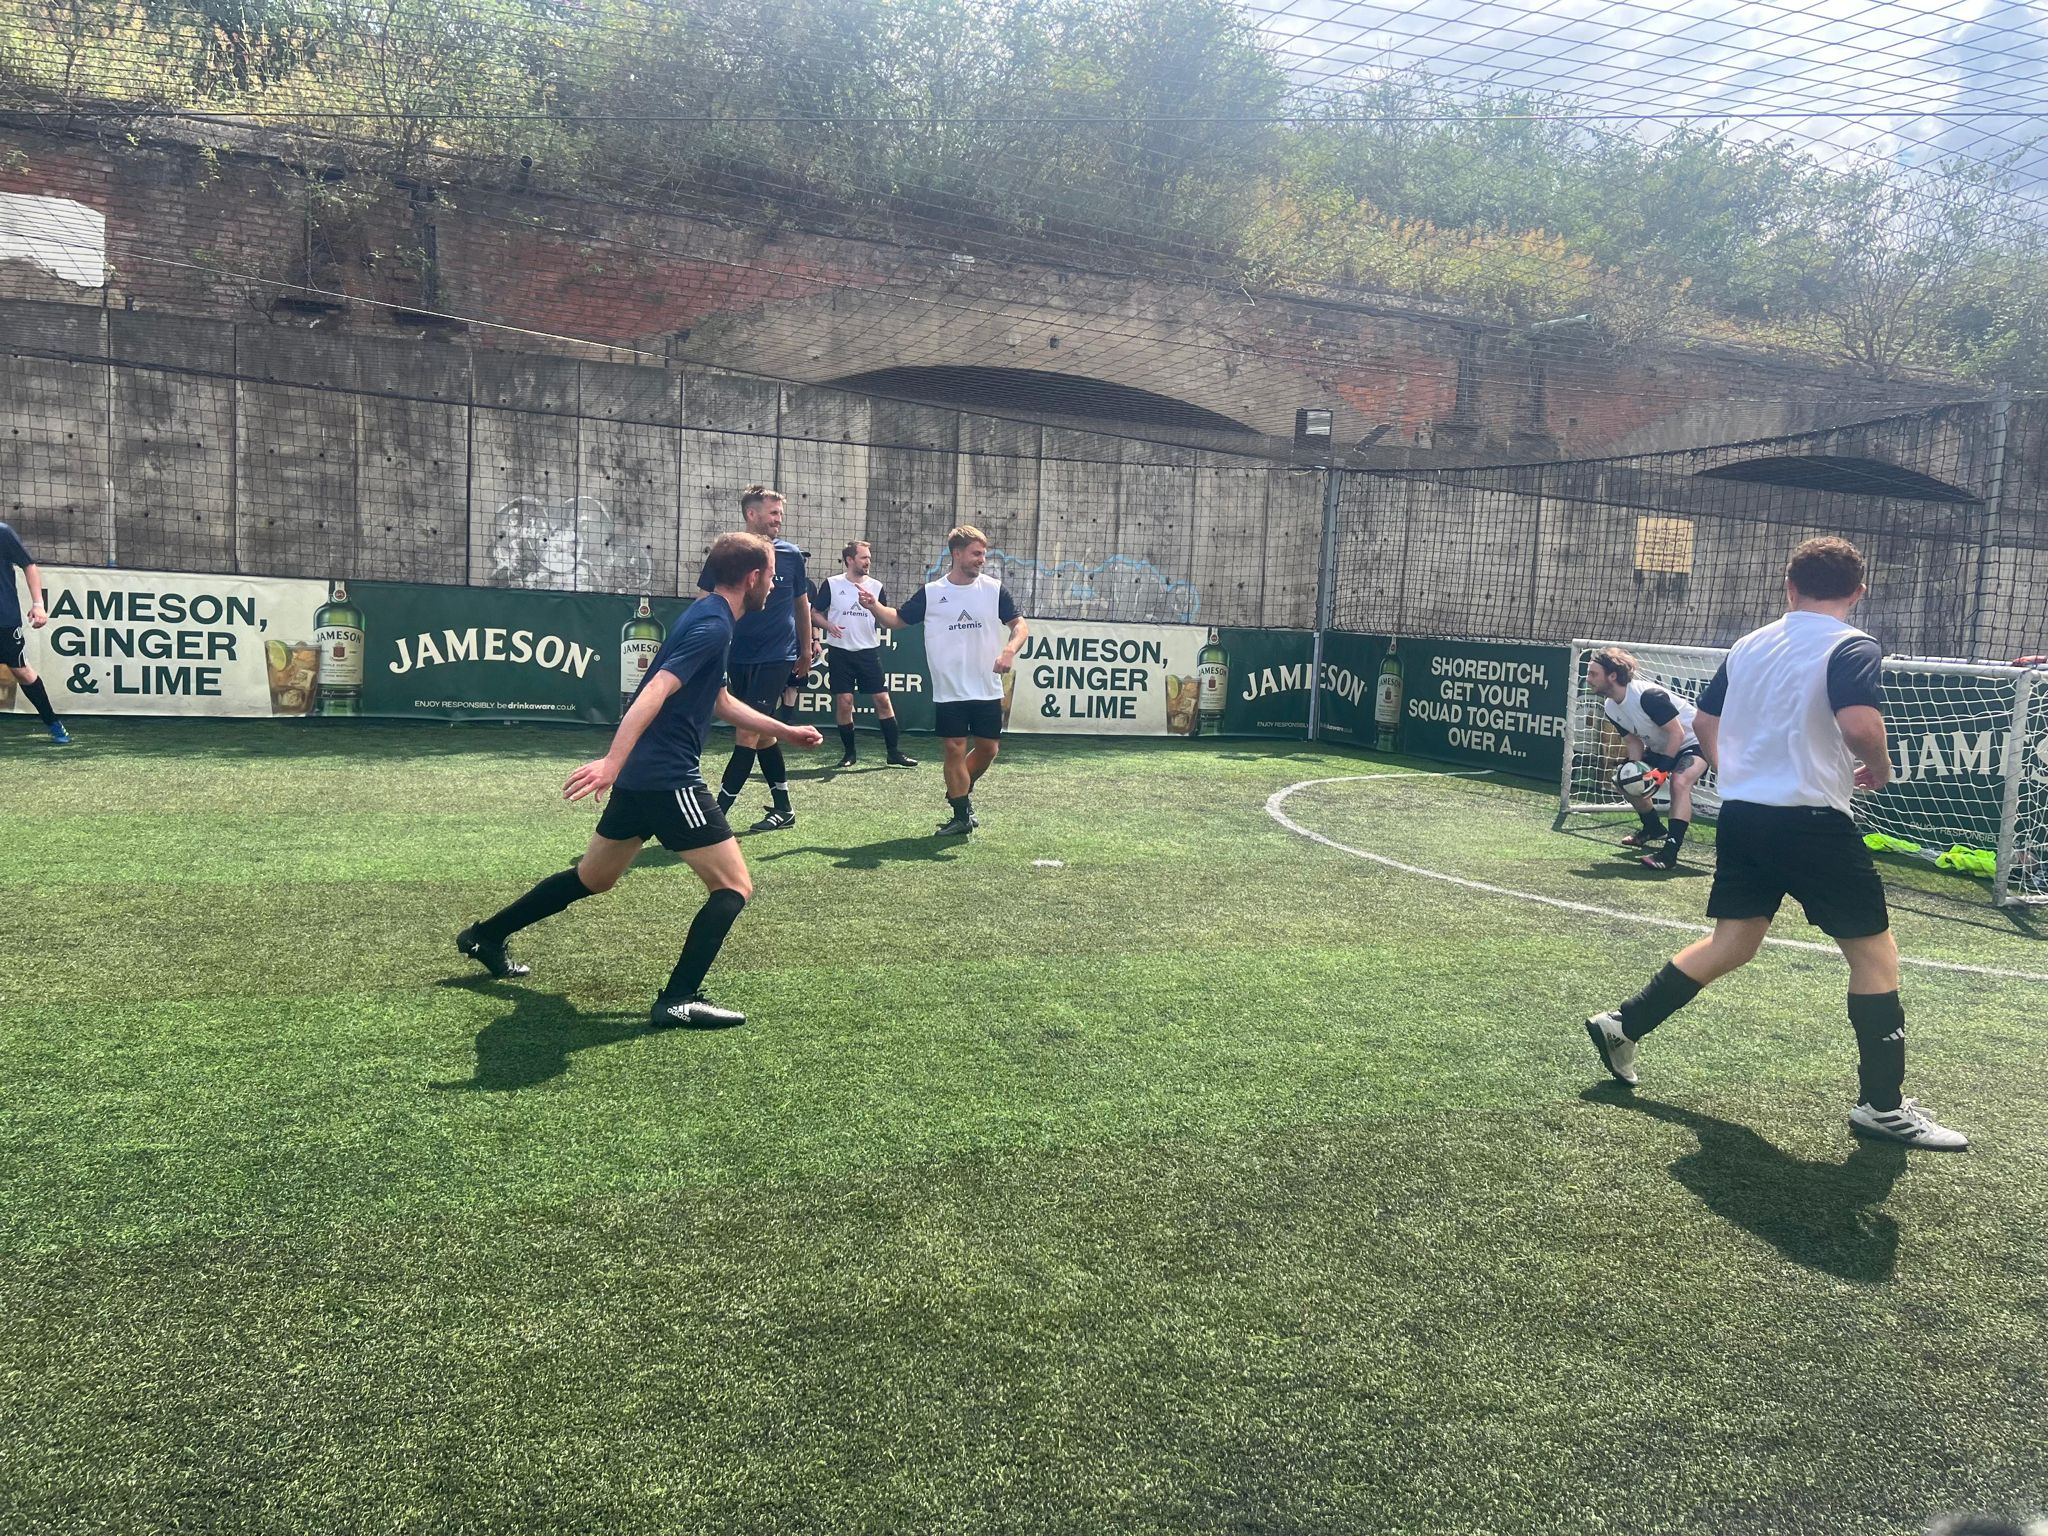 5 a side Charity Football Tournament